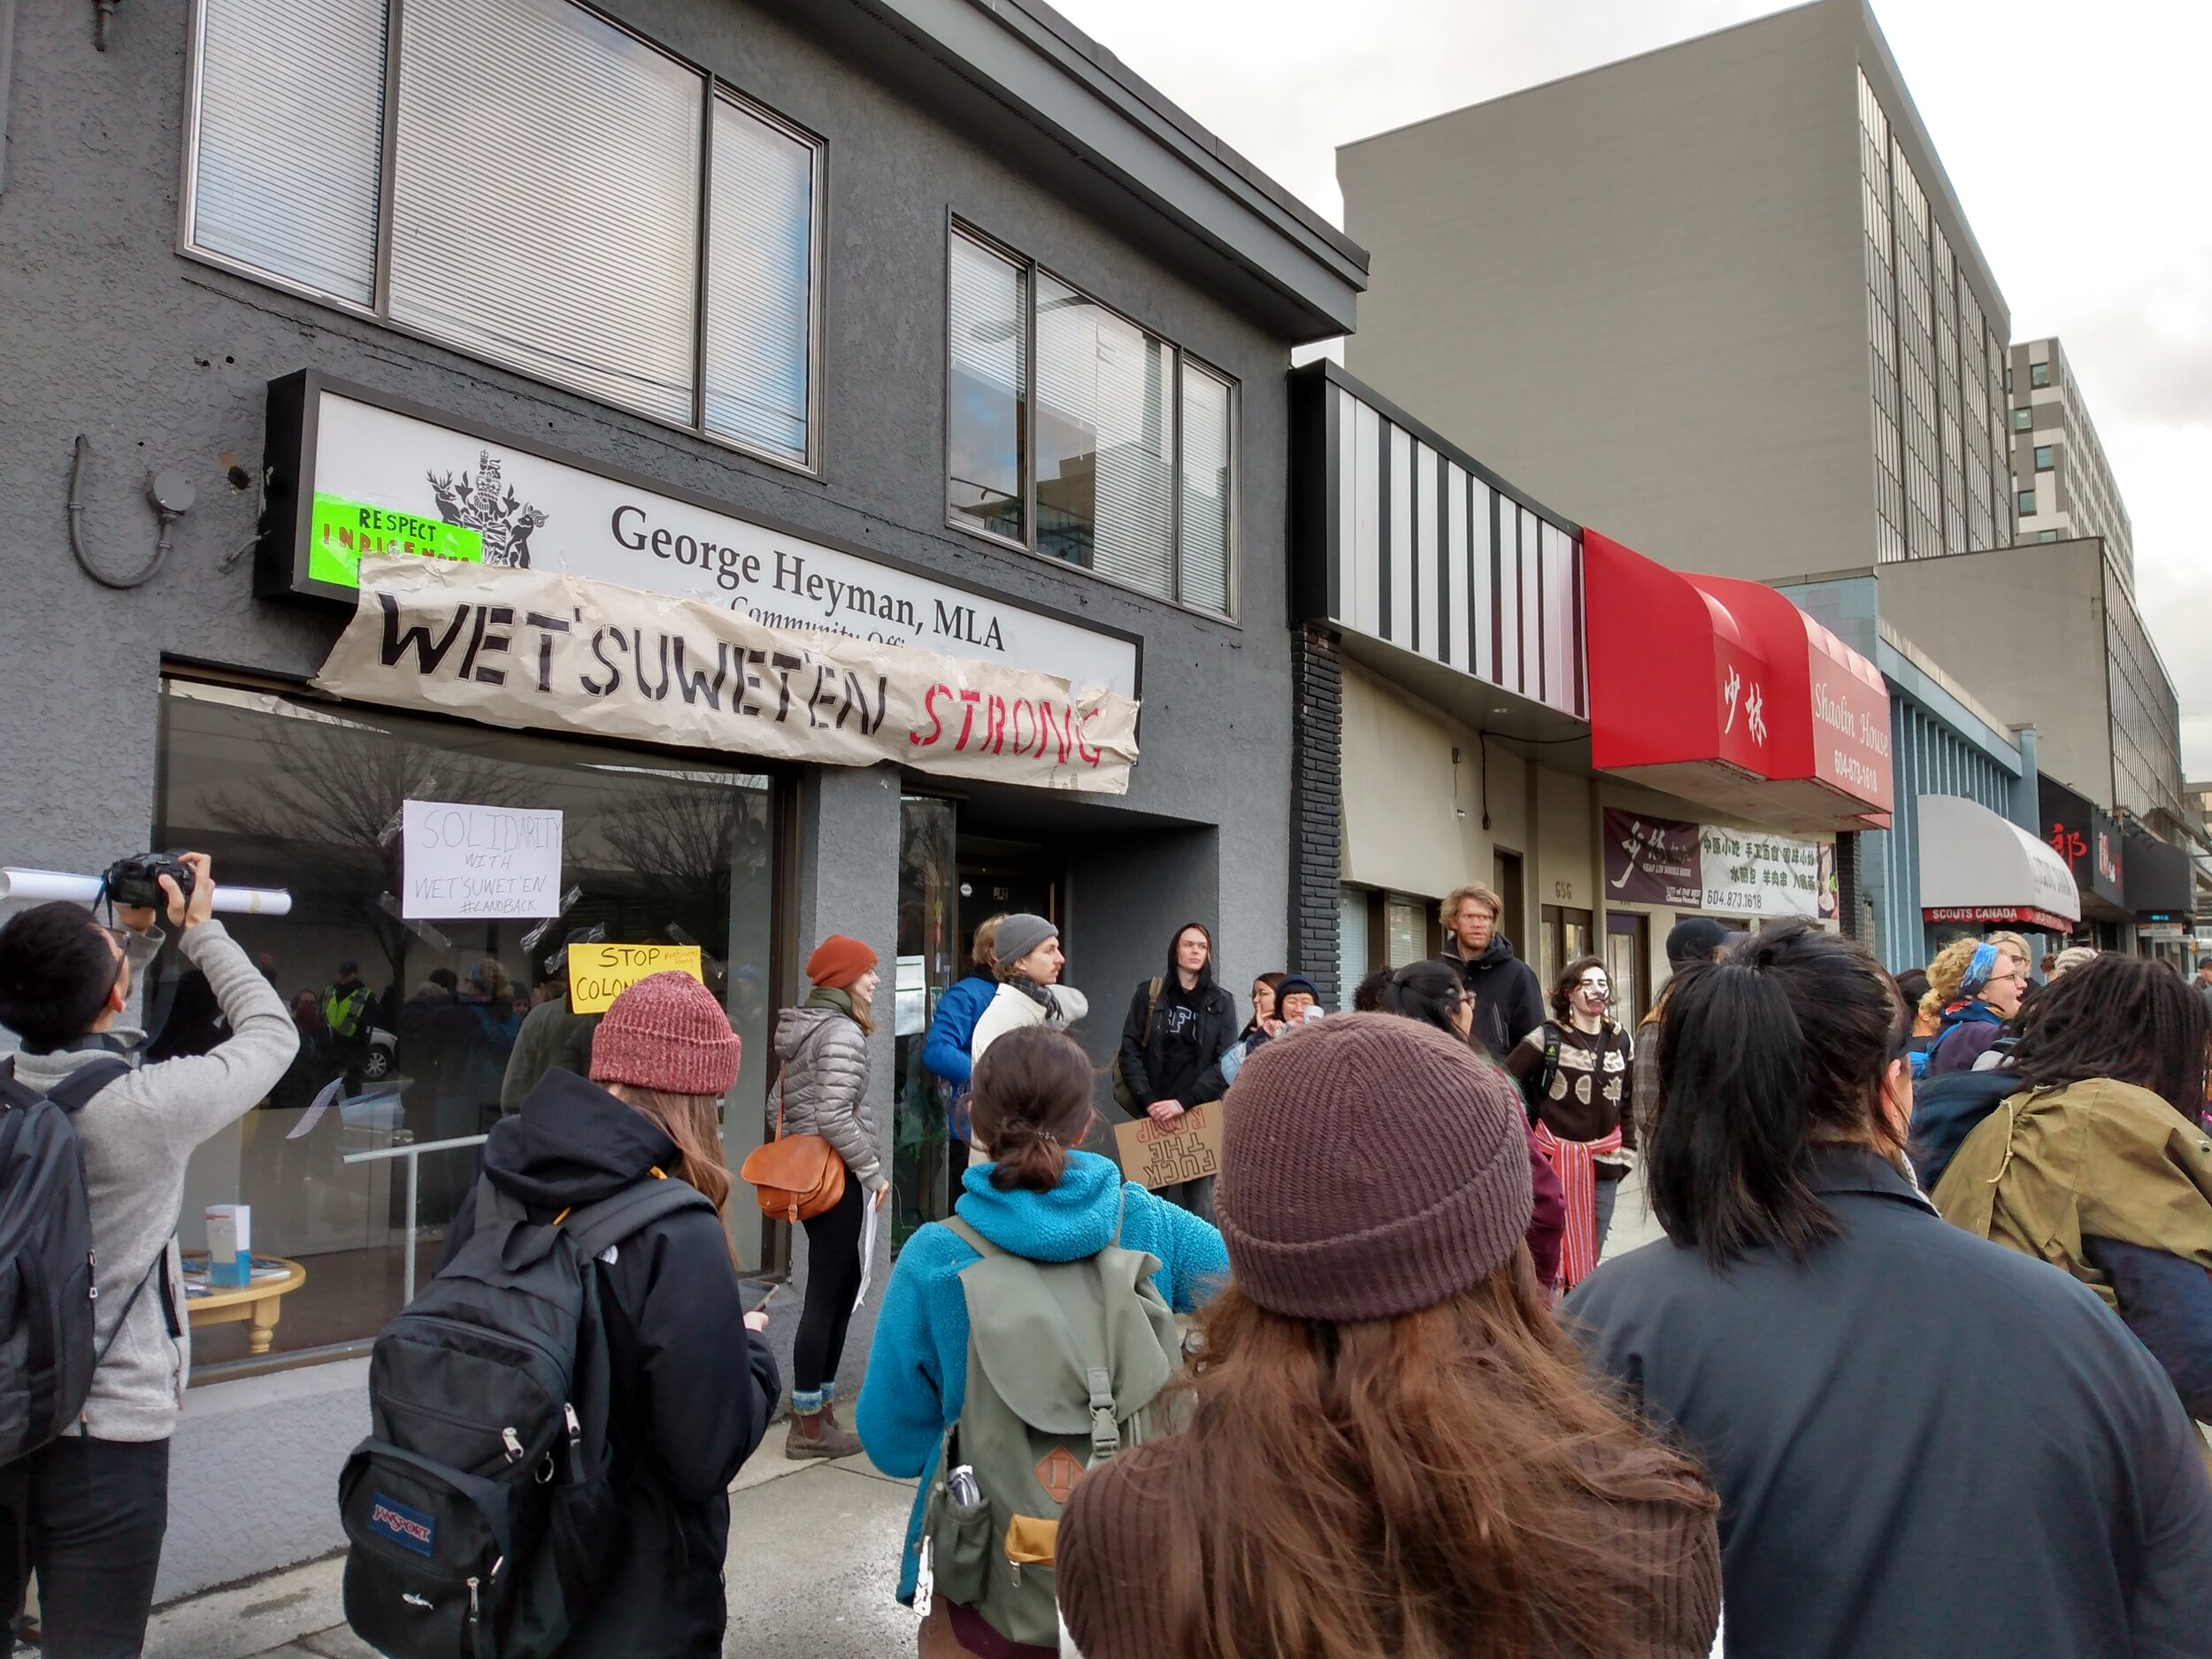 Student walkout, rally, and march in solidarity with Wet'suwet'en - Vancouver, Jan 2020 (7).jpg